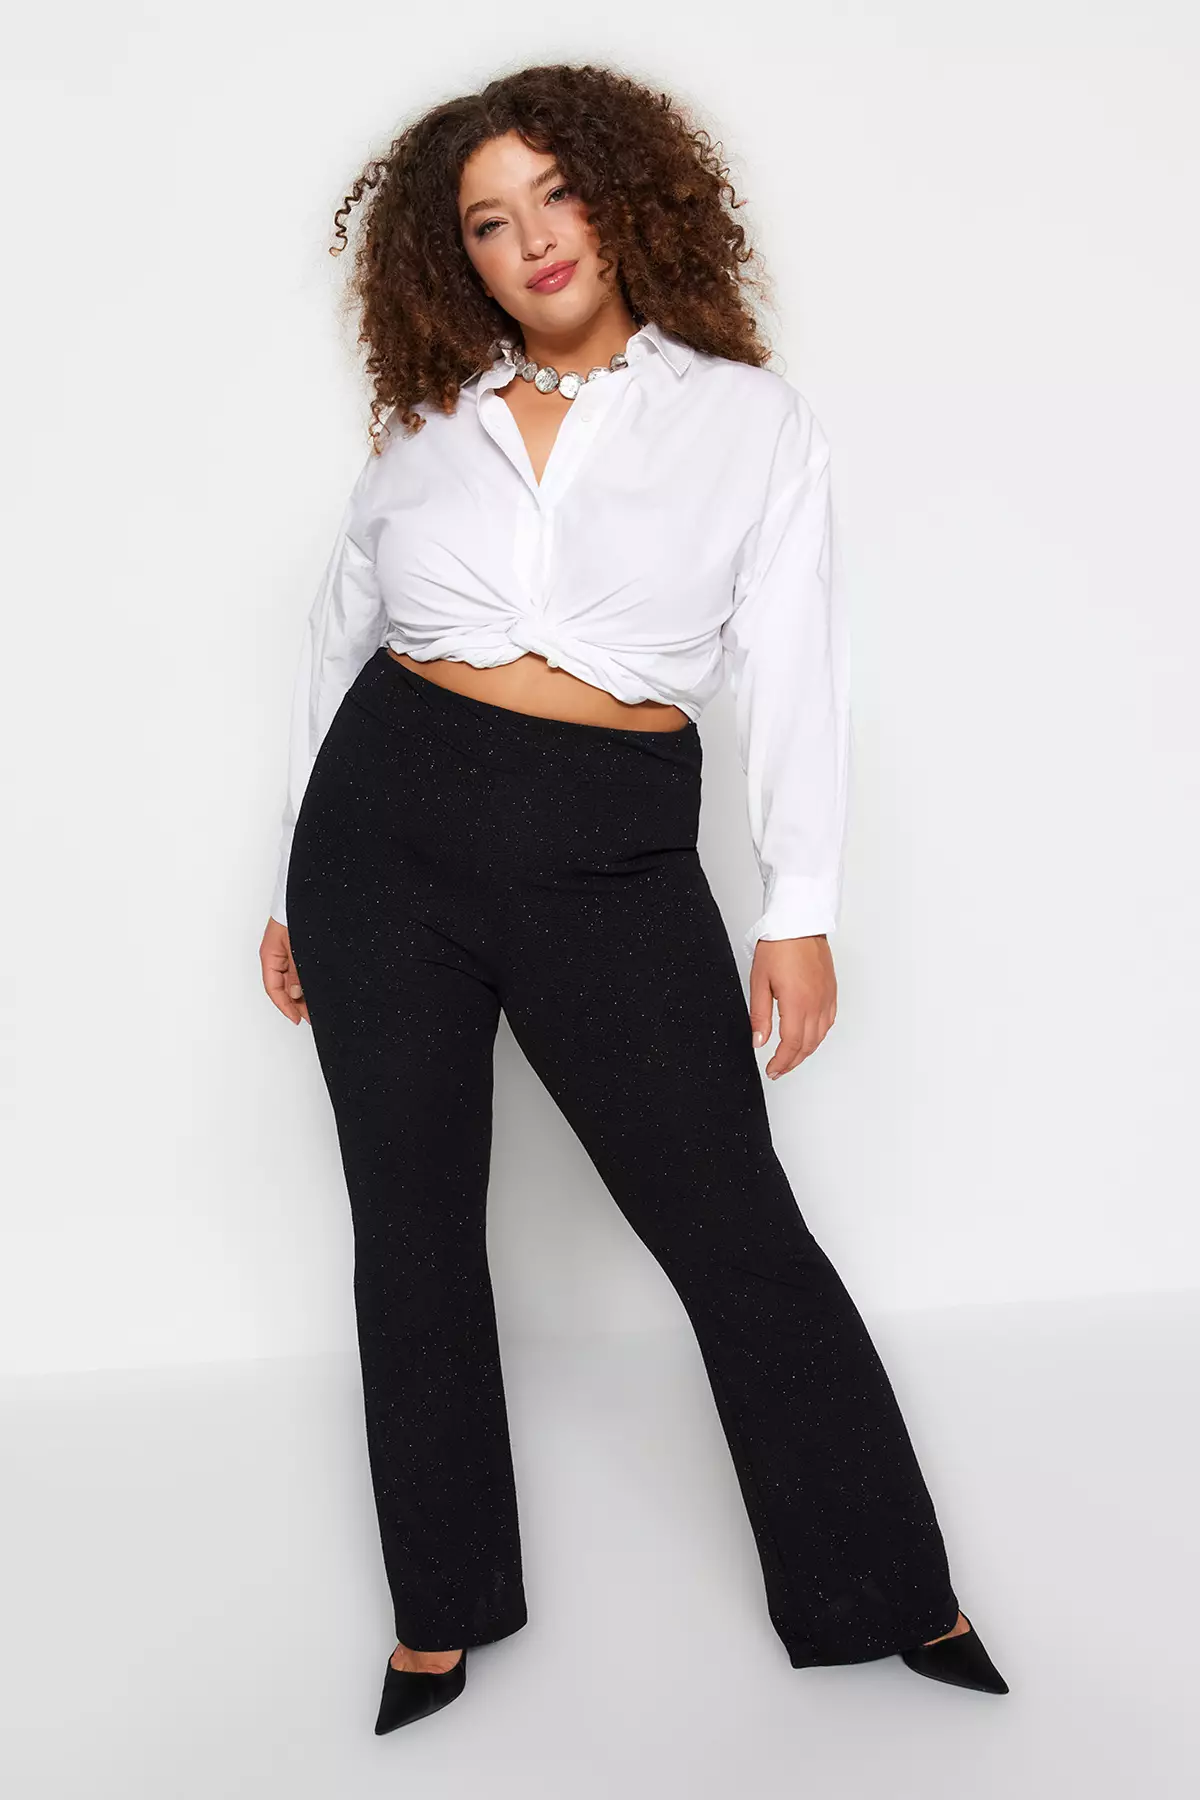 Plus Size Black Flared Trousers